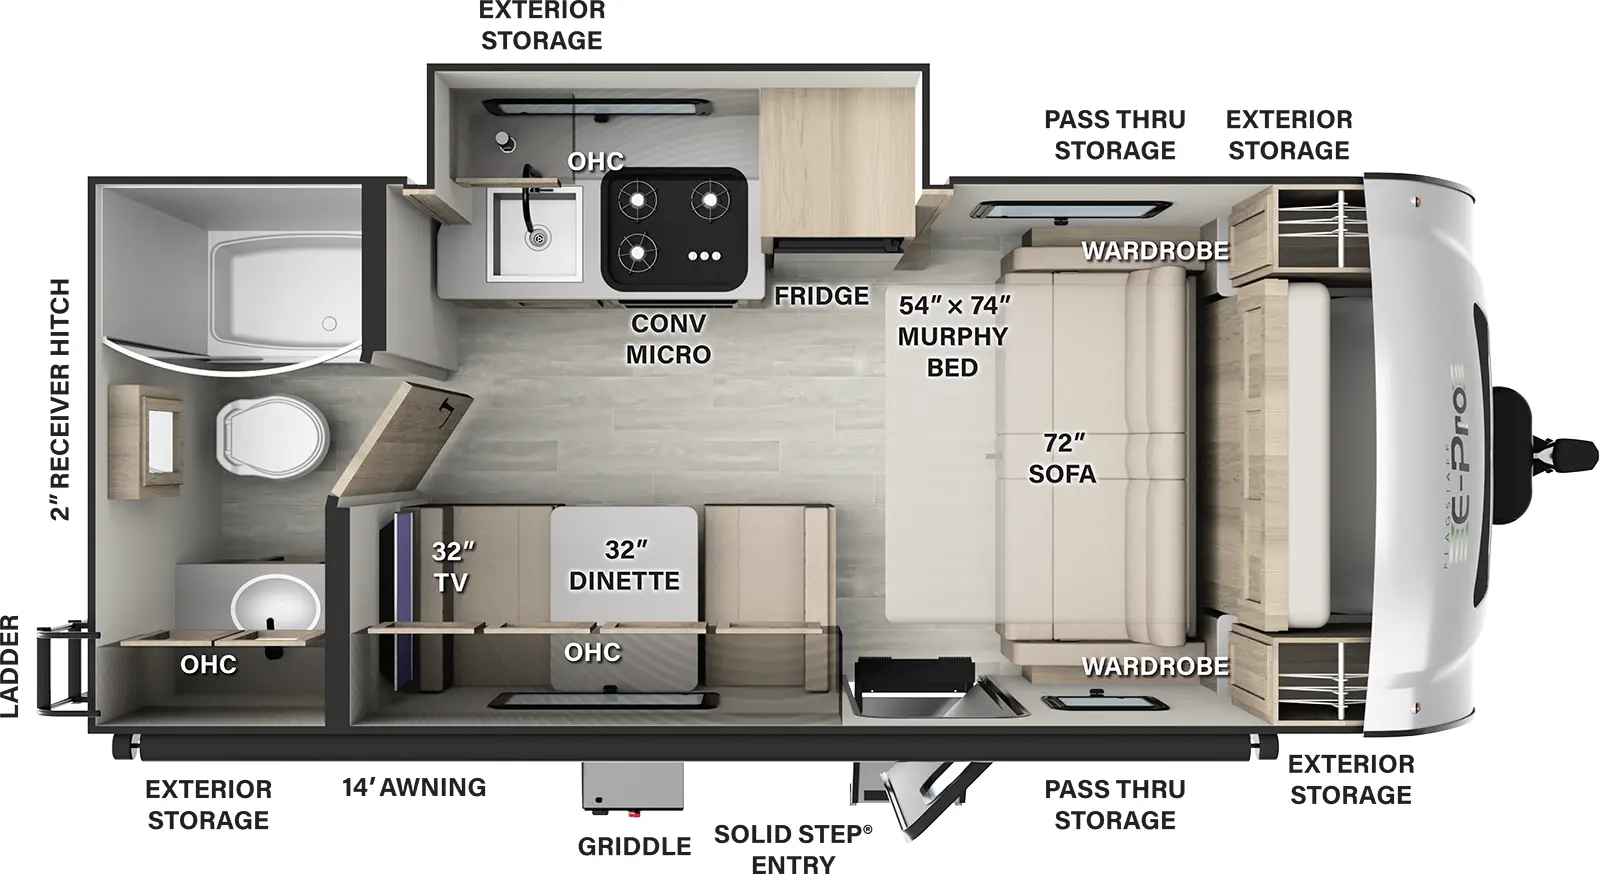 The E19FDS has 1 slide out and 1 entry. Exterior features storage, pass-thru storage, griddle, ladder, 2 inch receiver hitch, and 14 foot awning. Interior layout front to back: murphy bed/sofa with wardrobes on each side; off-door side slide out with refrigerator, kitchen counter with convection microwave, sink, and overhead cabinet; door side dinette with overhead cabinet and TV;  rear full bathroom with overhead cabinet.